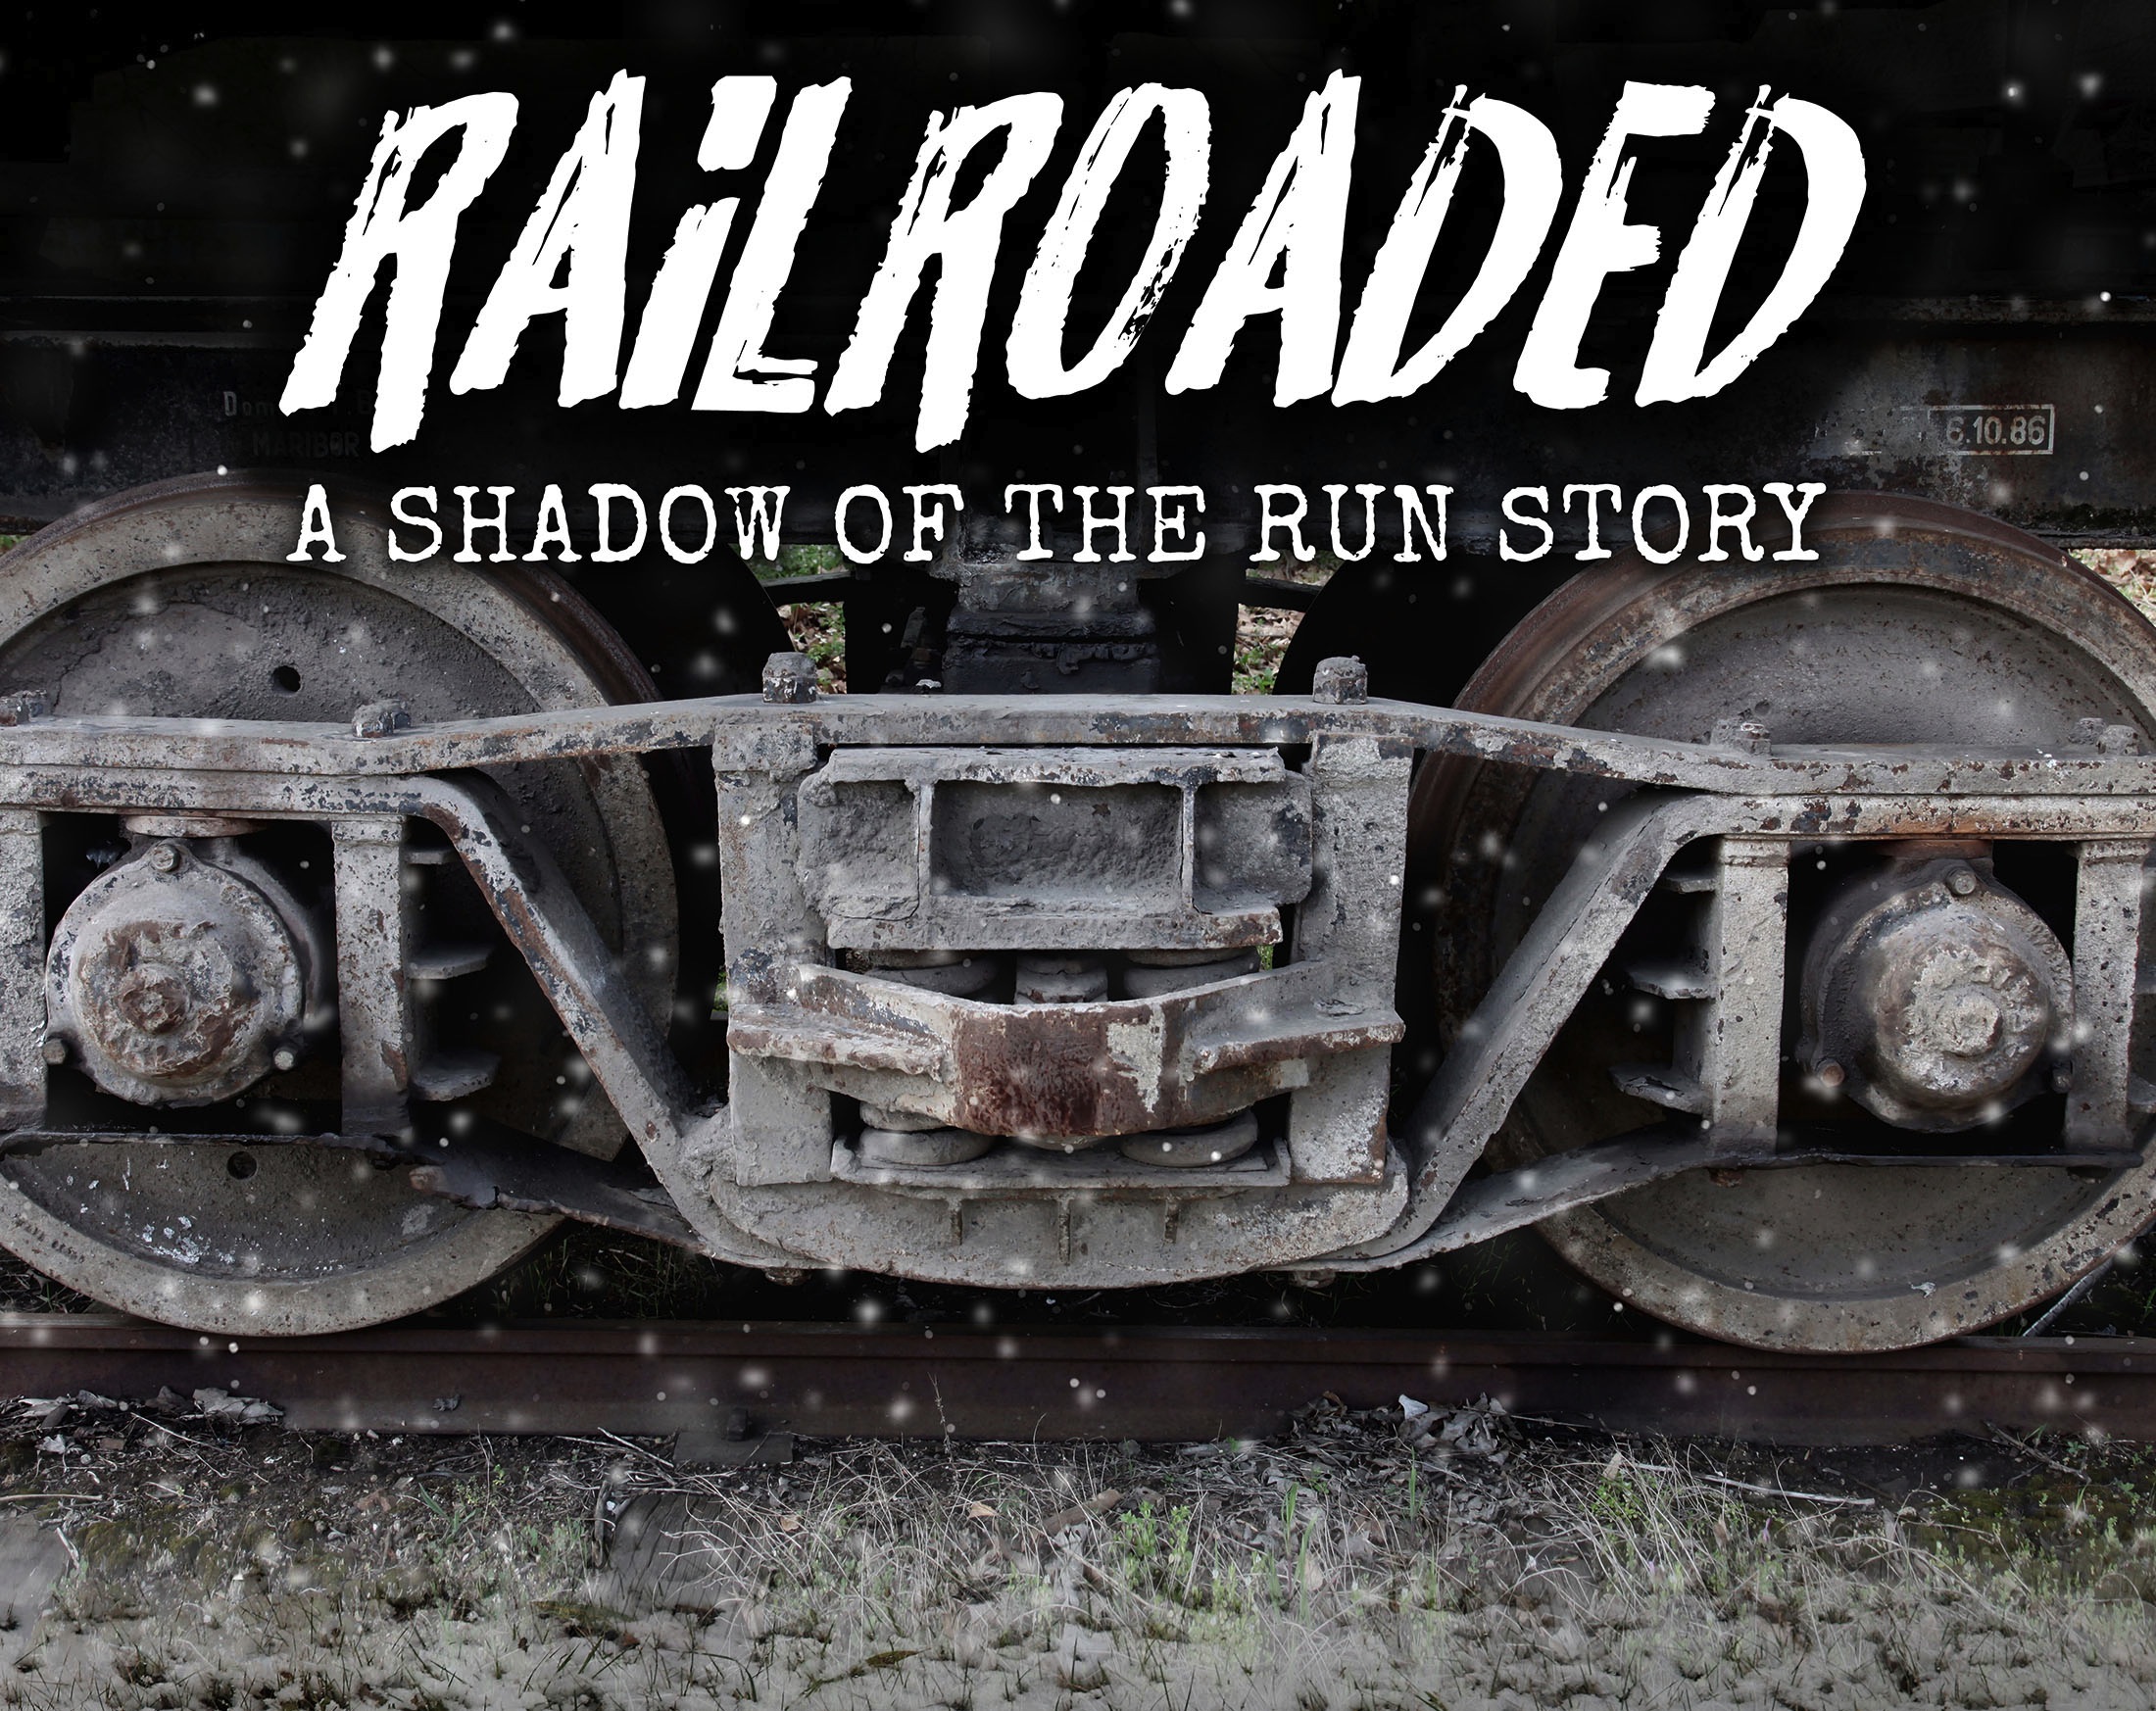 Shadow of the Run ‘pop-up’ story to have limited engagement in town